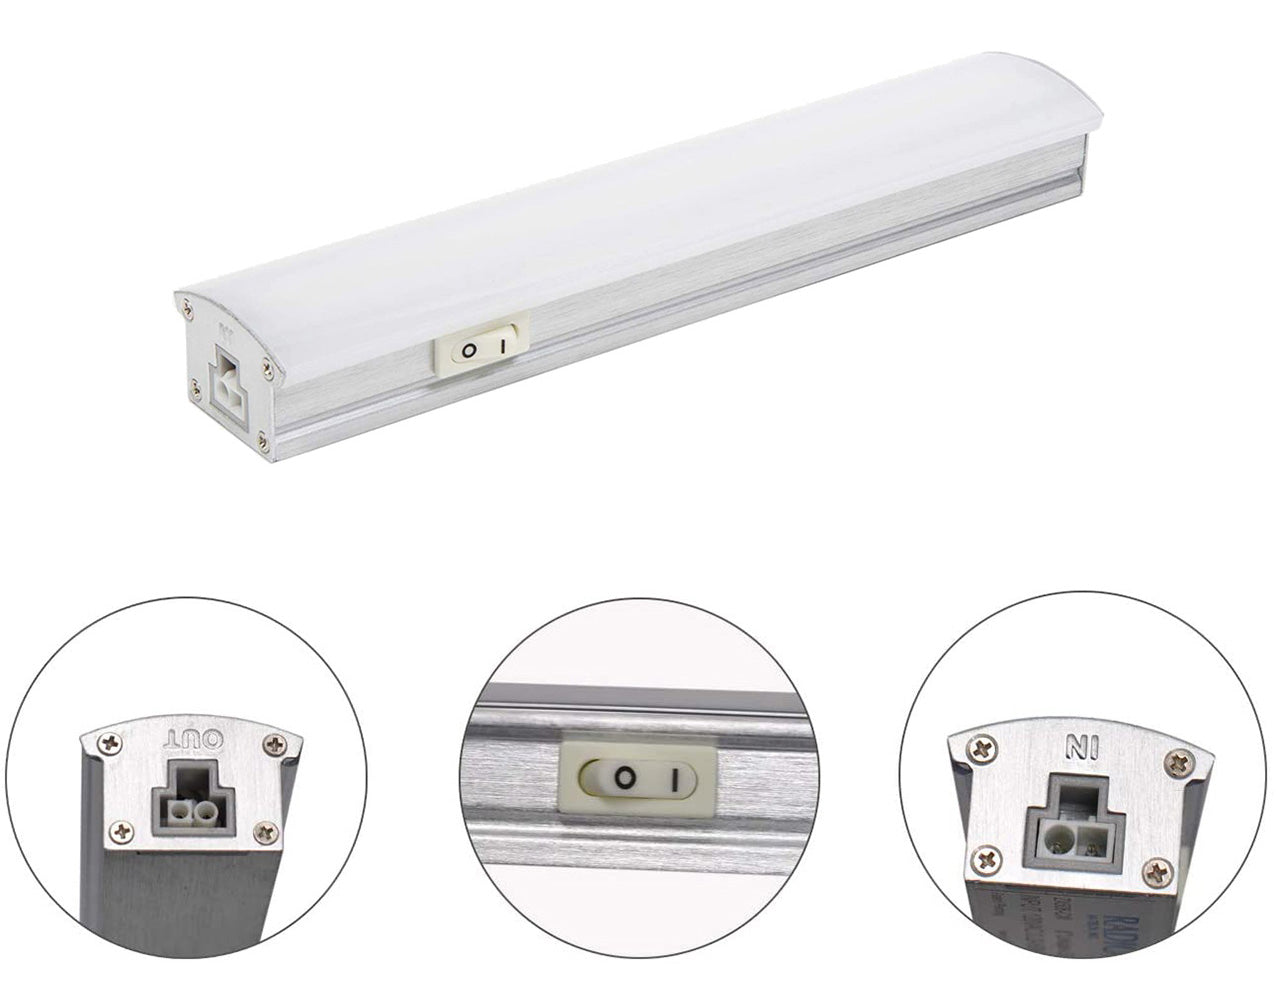 ZX506-CW-9, LED Task/Accent, Frosted Diffuser, On/Off Rocker Switch, 90 CRI, 4500K, 8"L, 1.9W